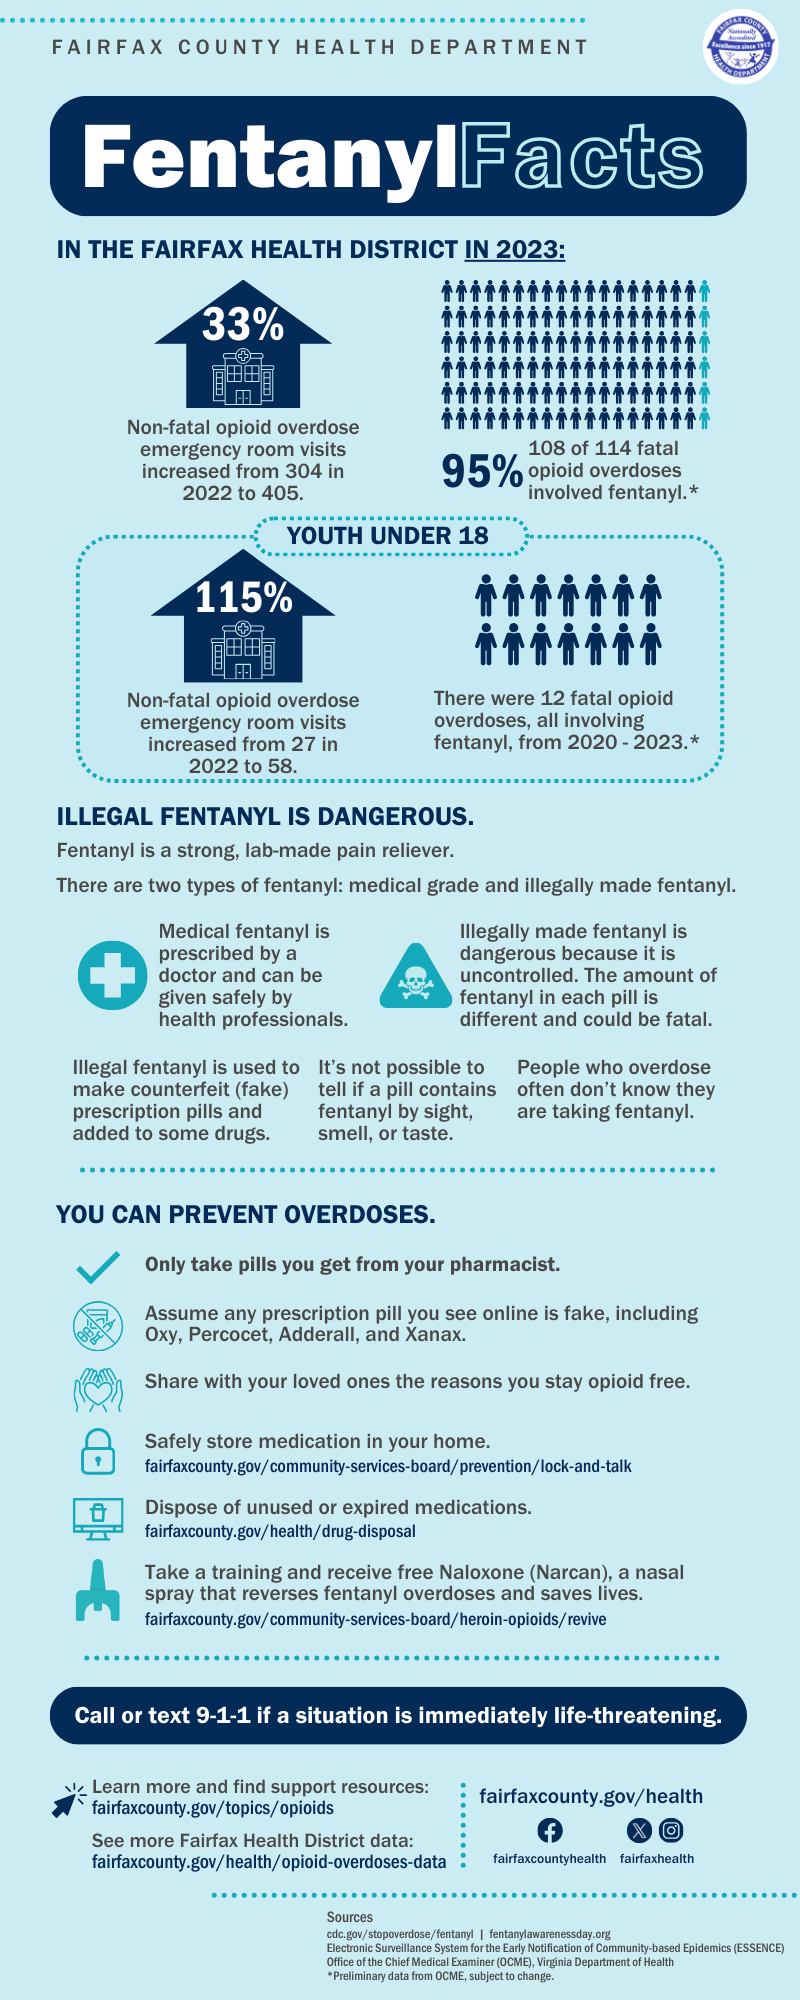 Facts about fentanyl in the Fairfax Health District